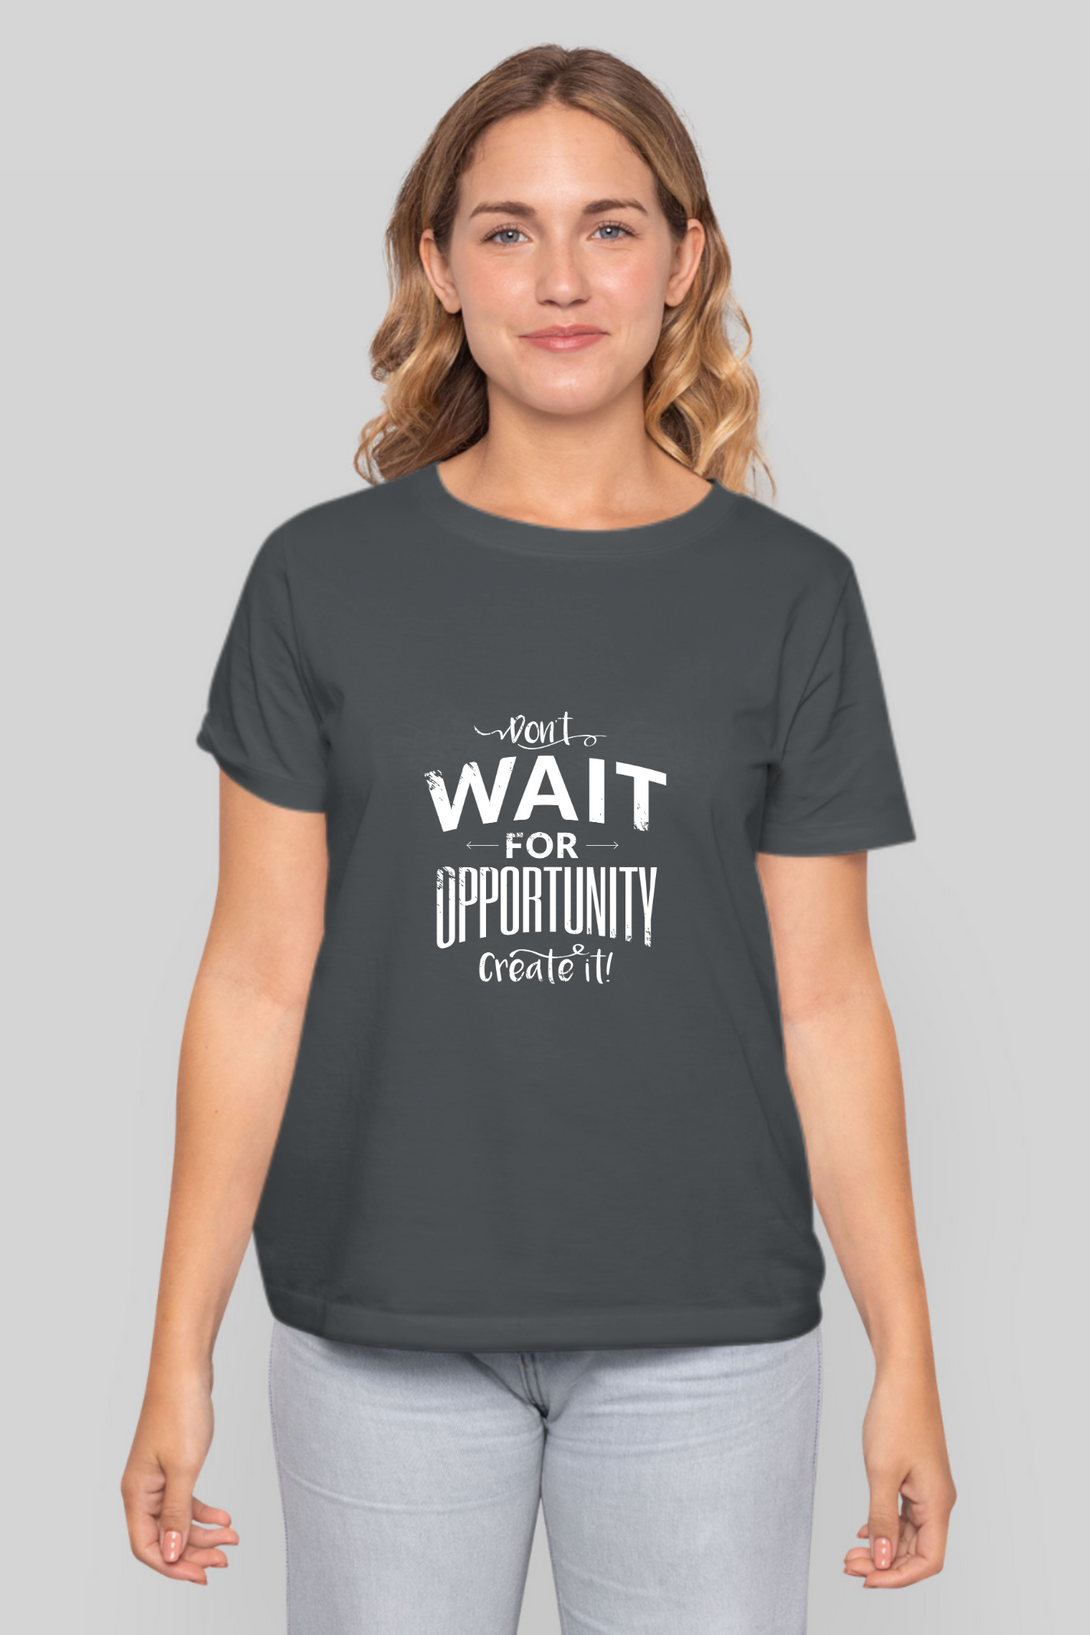 Create Opportunity Printed T-Shirt For Women - WowWaves - 14